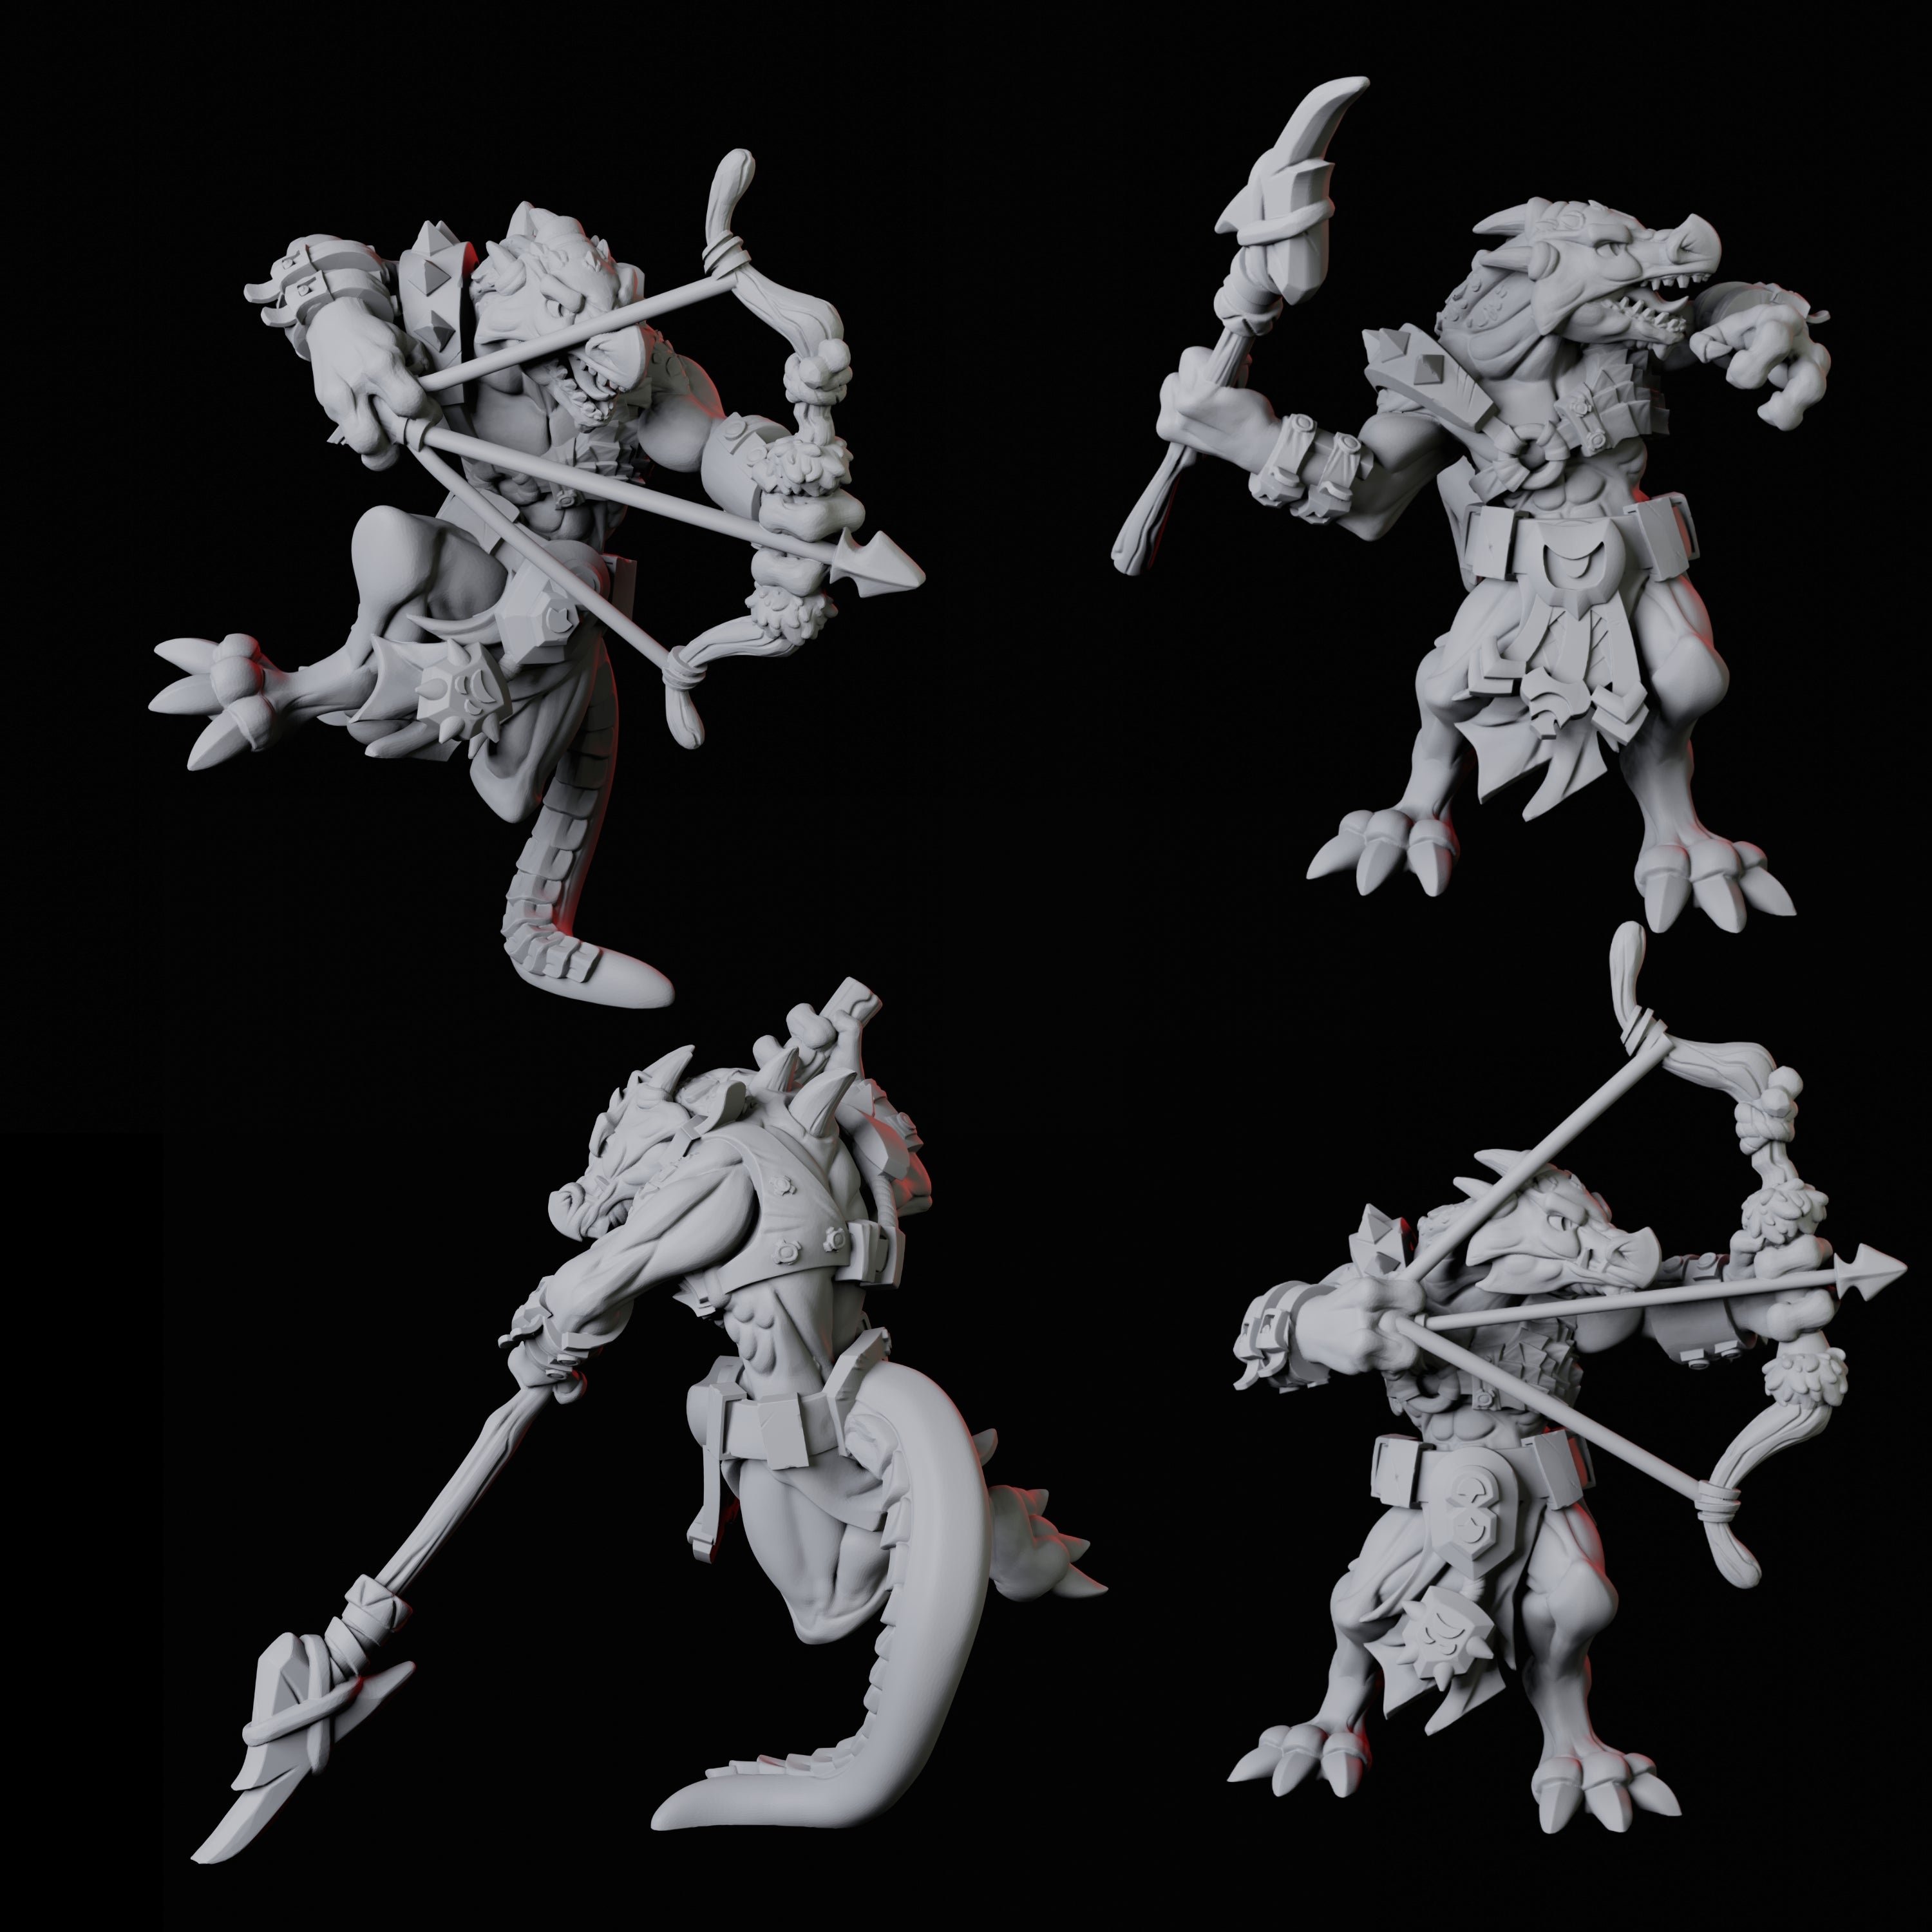 Four Kobold Rangers Miniature for Dungeons and Dragons, Pathfinder or other TTRPGs